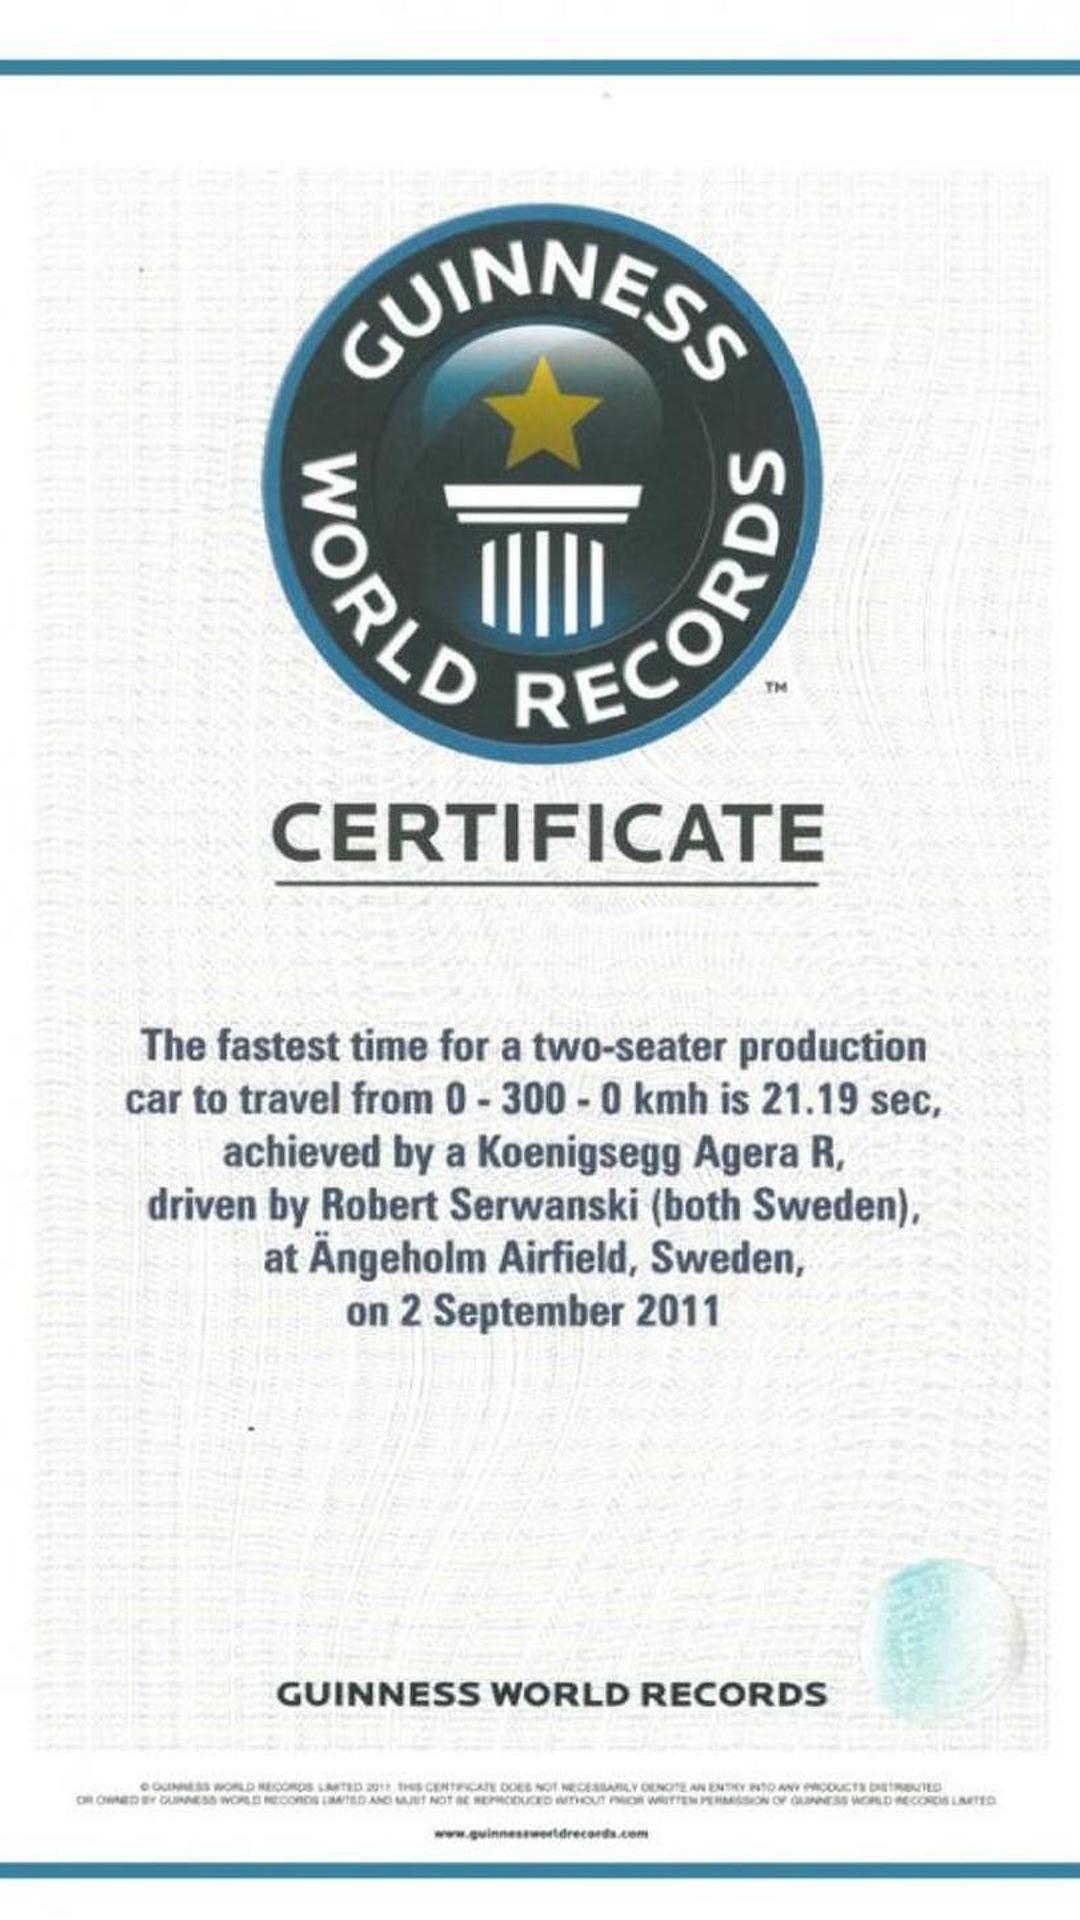 Koenigsegg Agera R Sets Guiness World Record For 110 3110110 110 Km/h  Throughout Guinness World Record Certificate Template